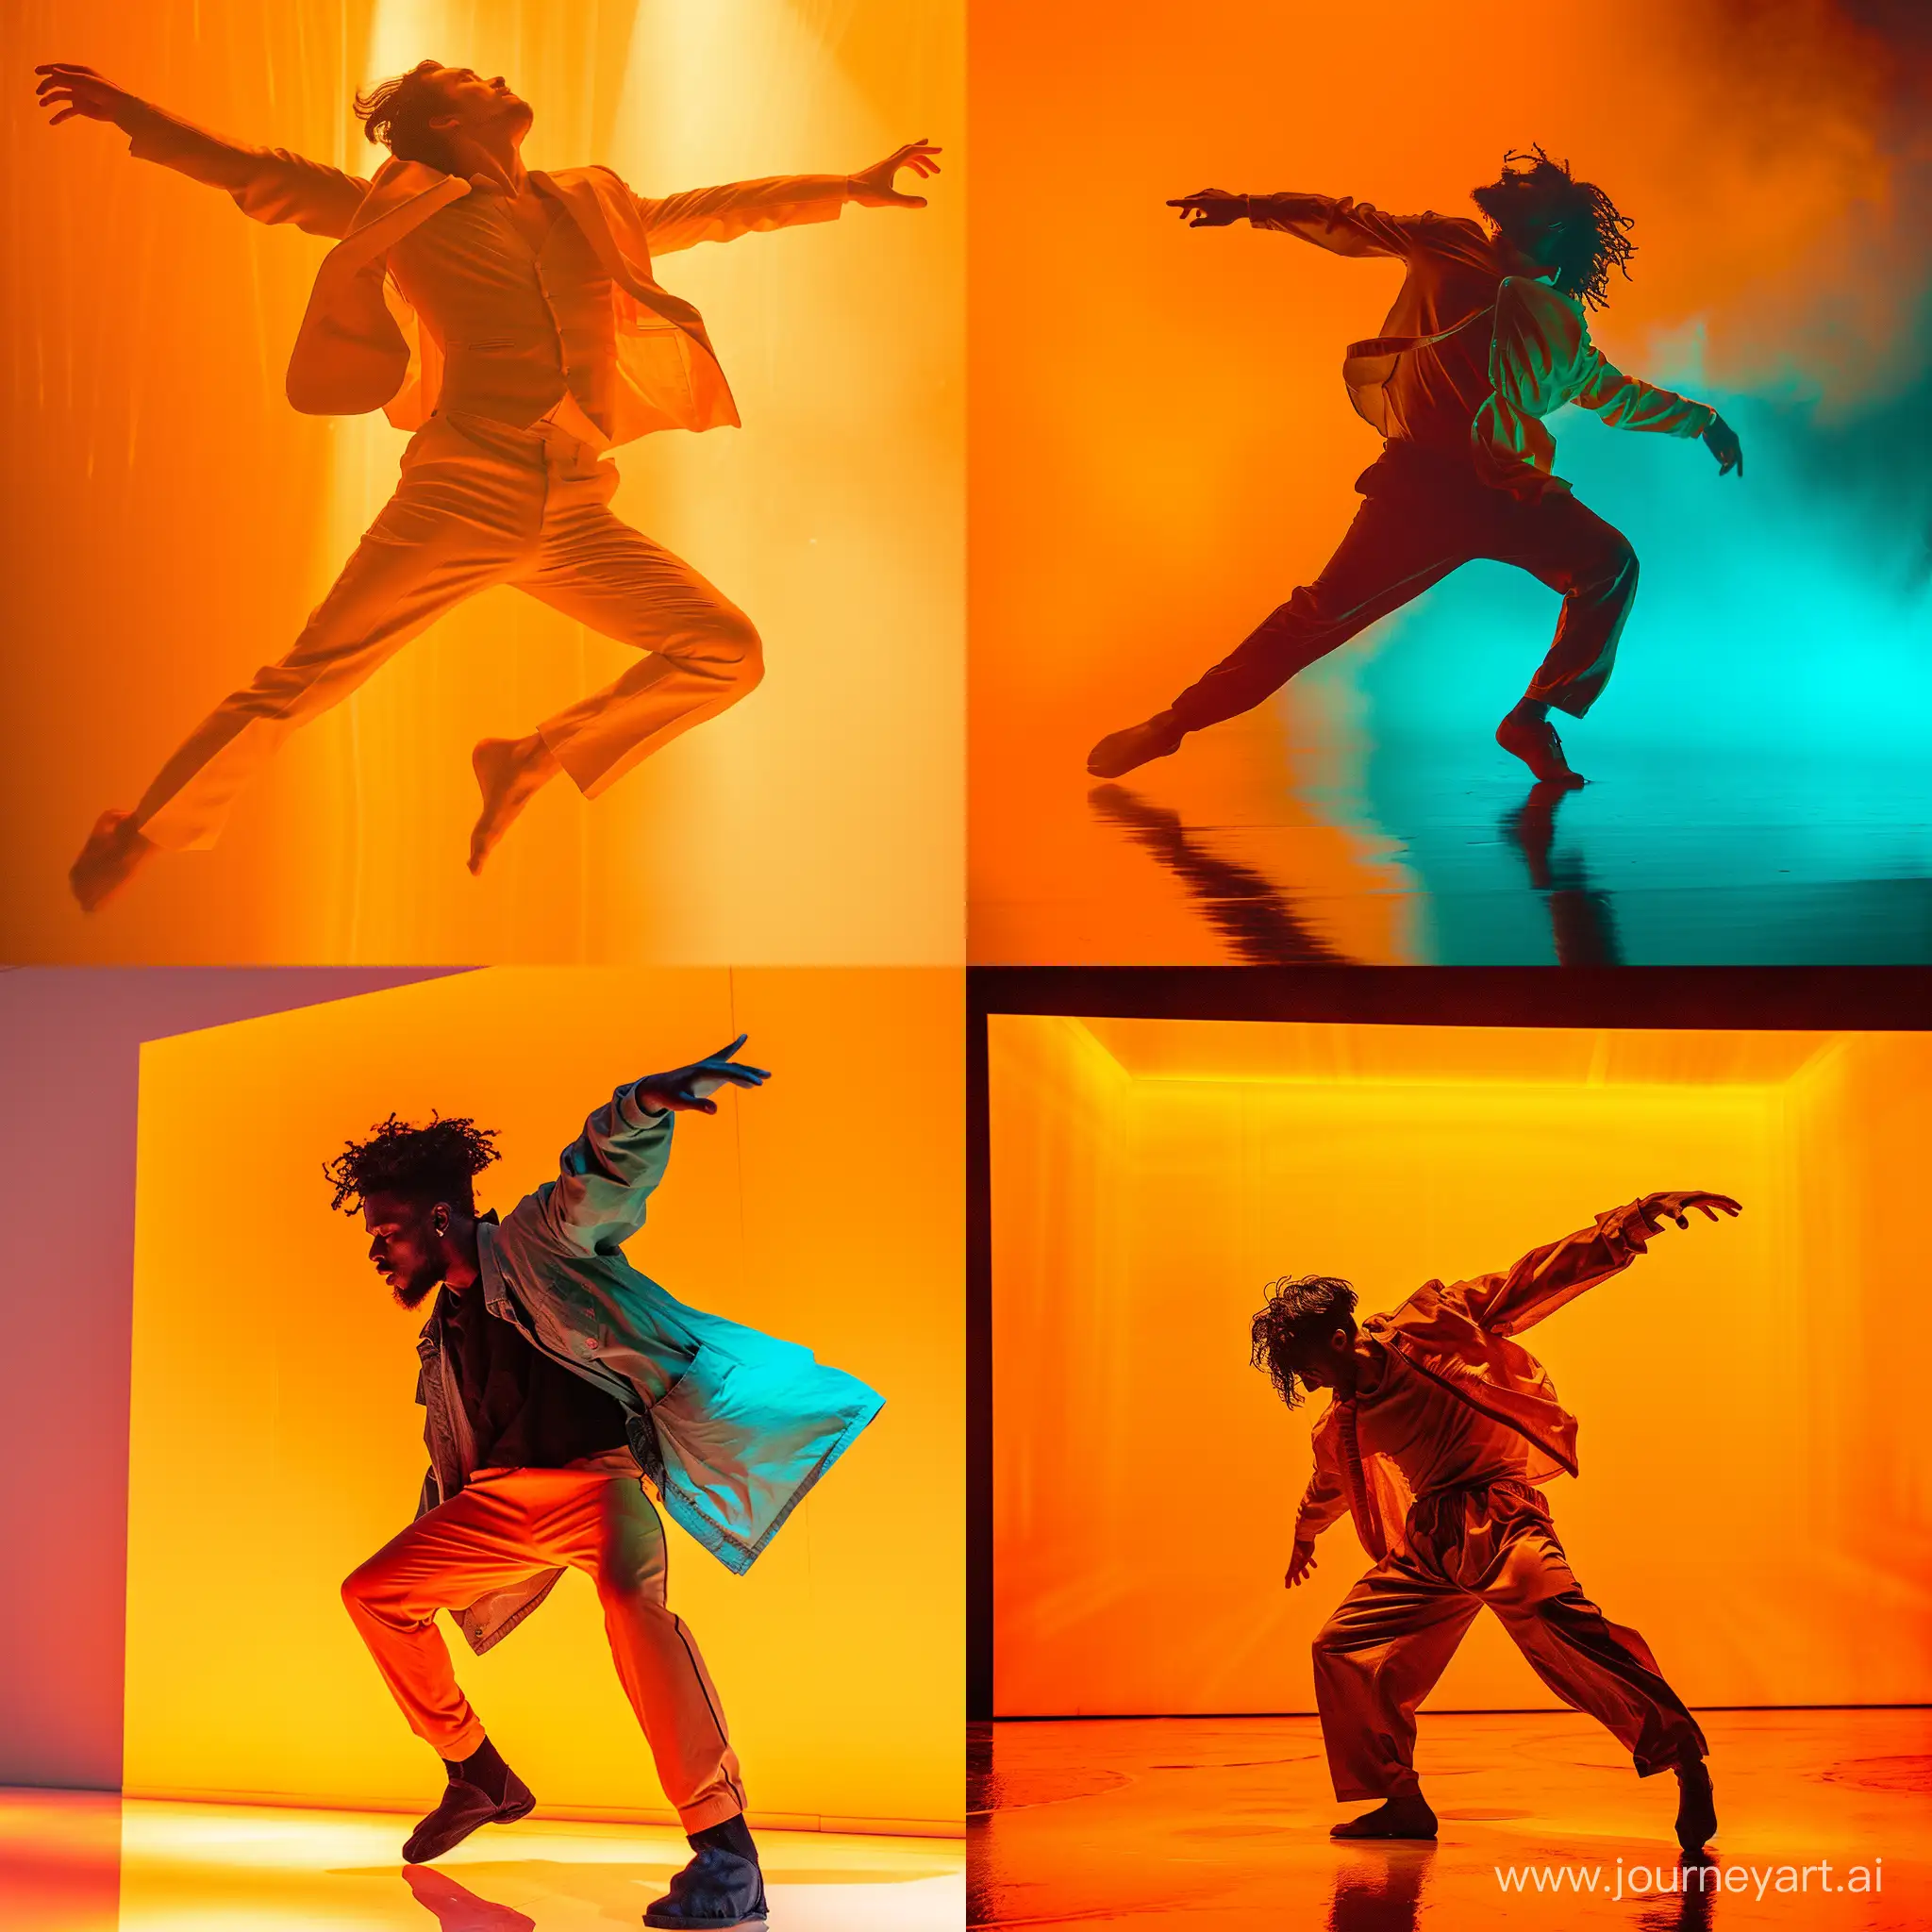 Vibrant-Turquoise-and-Orange-Dance-Scene-with-a-Single-Actor